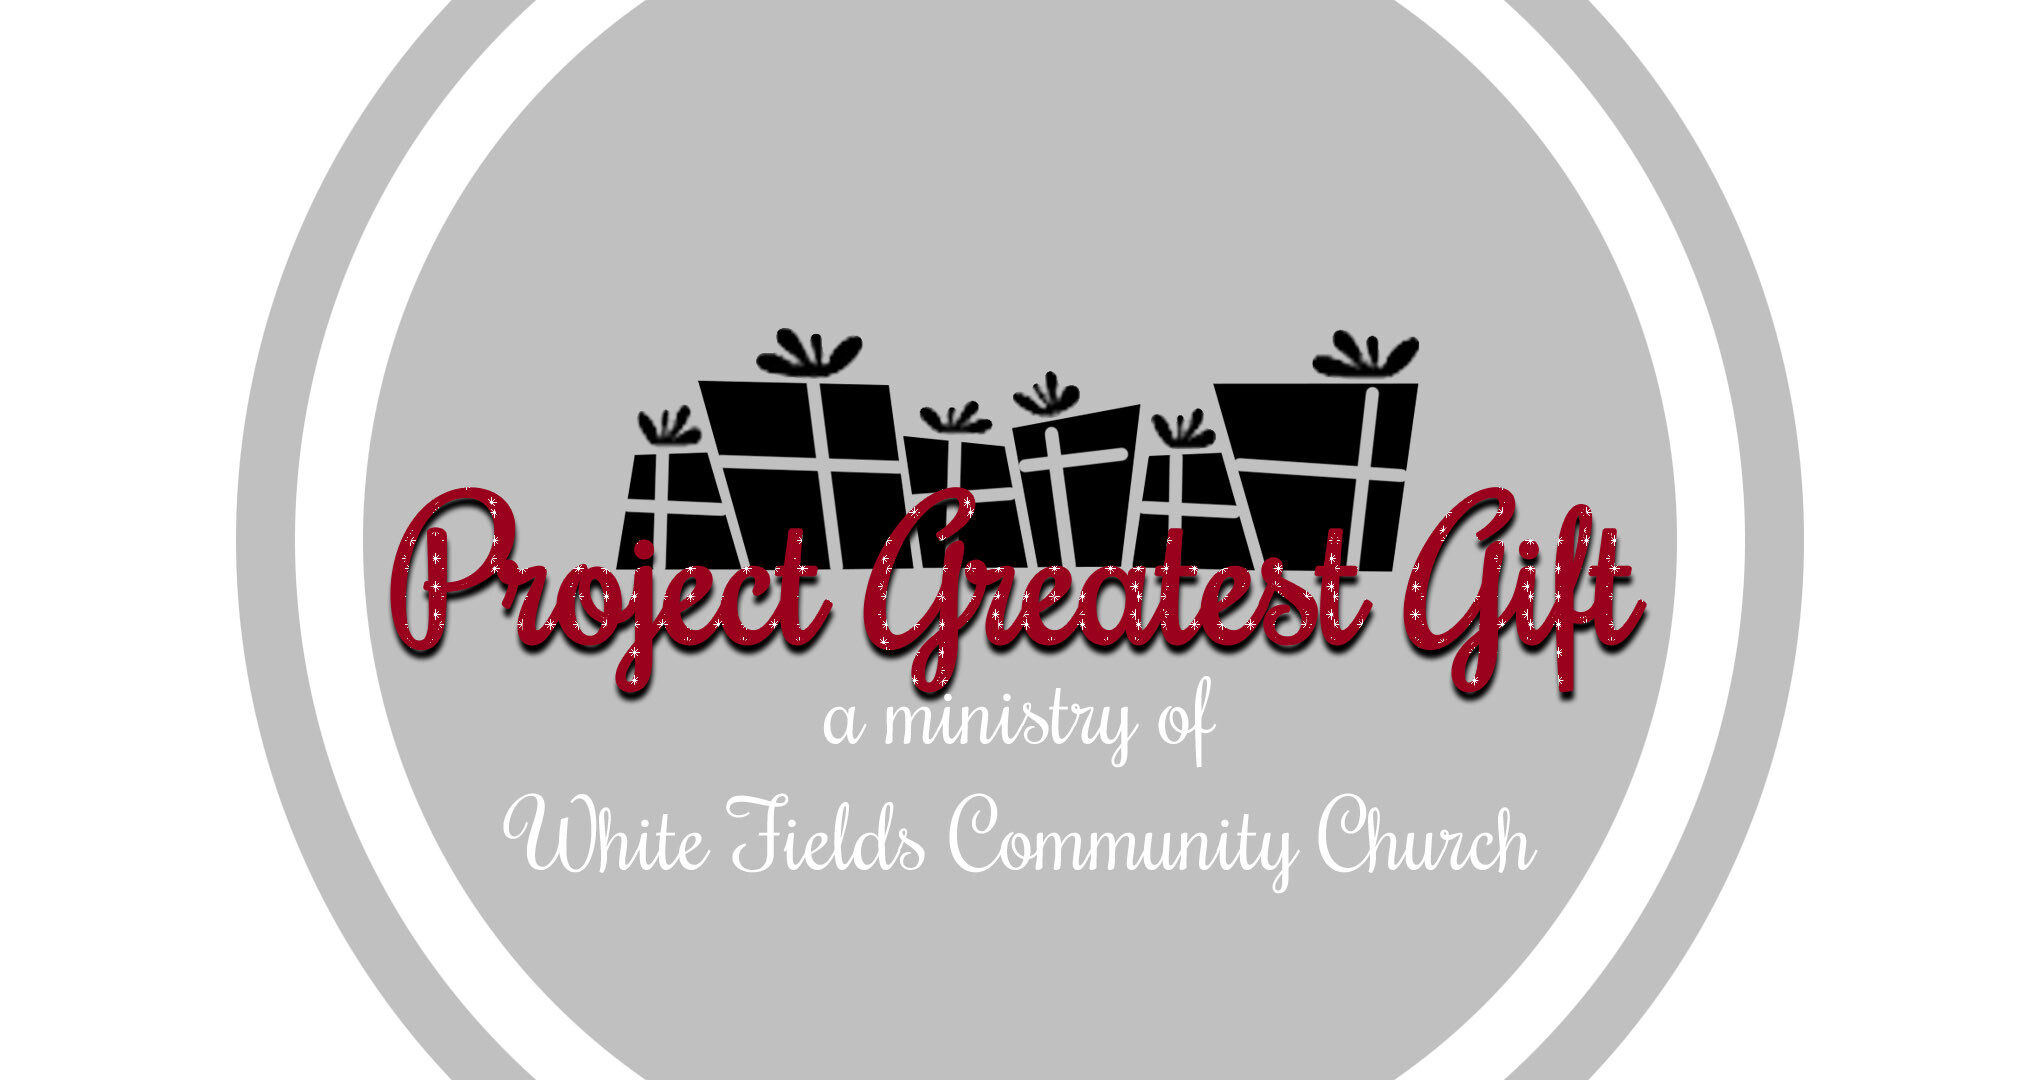 Project Greatest Gift 2022